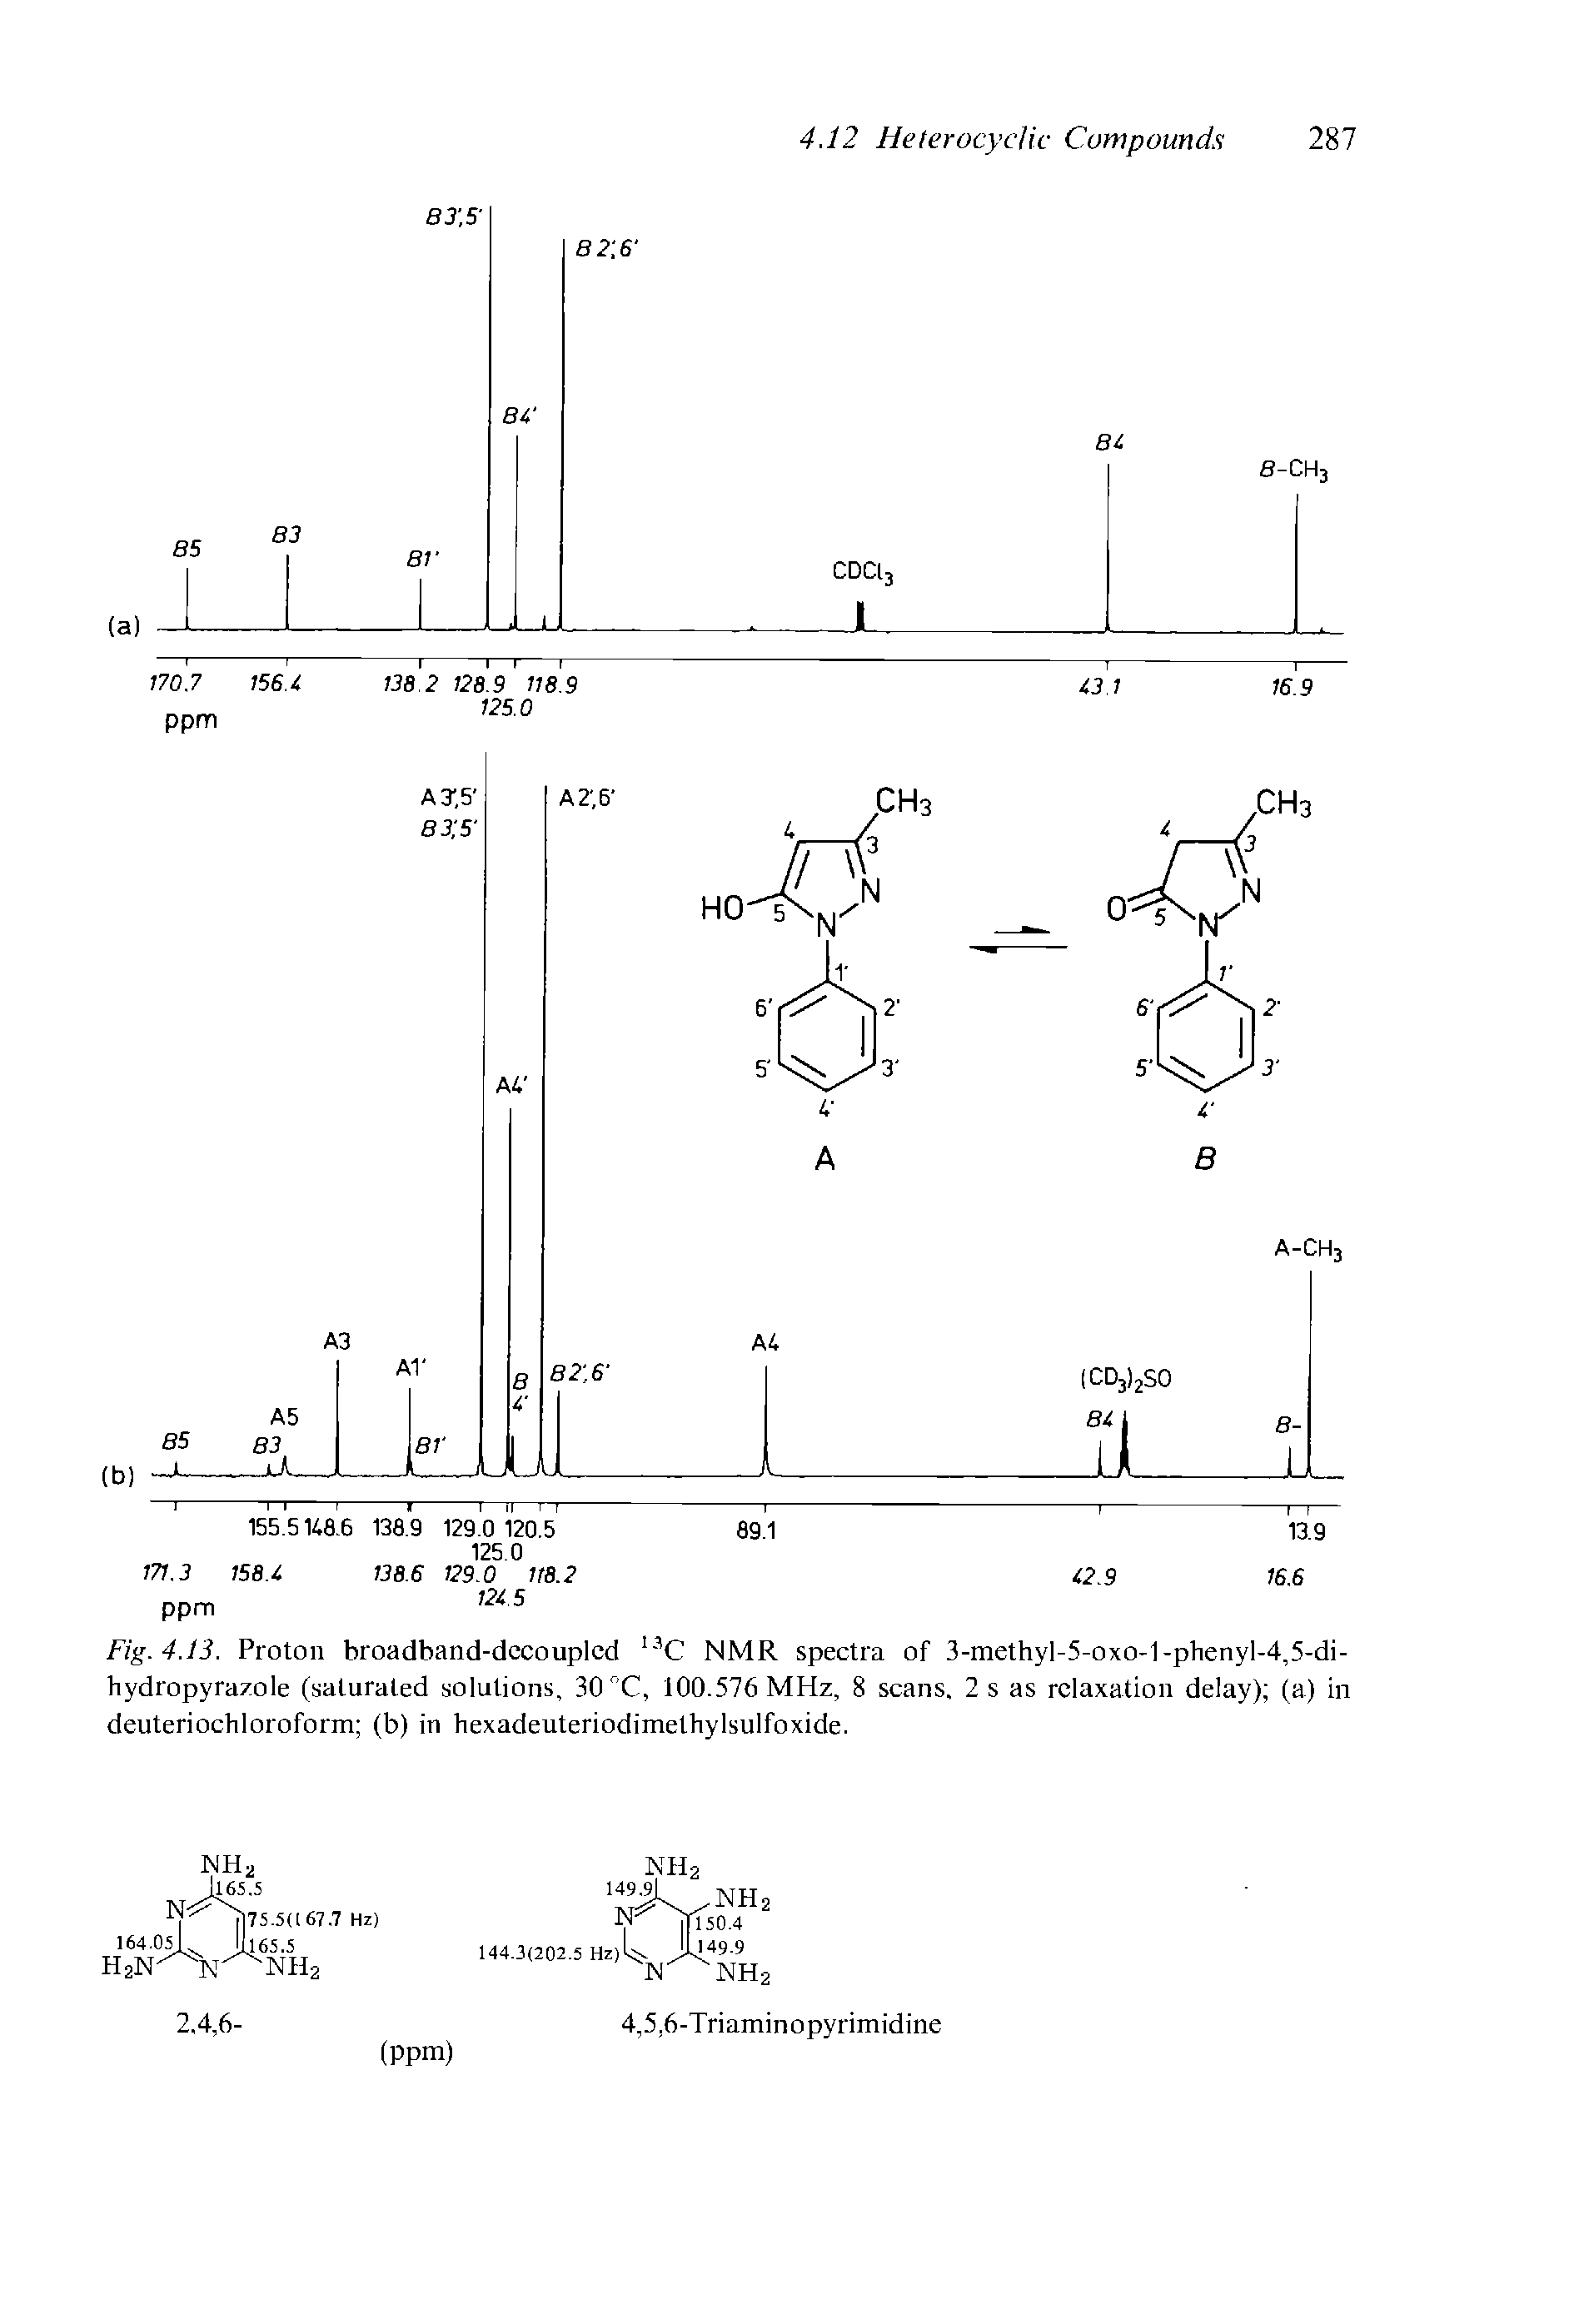 Fig. 4.13. Proton broadband-decoupled 13C NMR spectra of 3-methyl-5-oxo-1-phenyl-4,5-di-hydropyrazole (saturated solutions, 30 "C, 100.576 MHz, 8 scans, 2 s as relaxation delay) (a) in deuteriochloroform (b) in hexadeuteriodimethylsulfoxide.